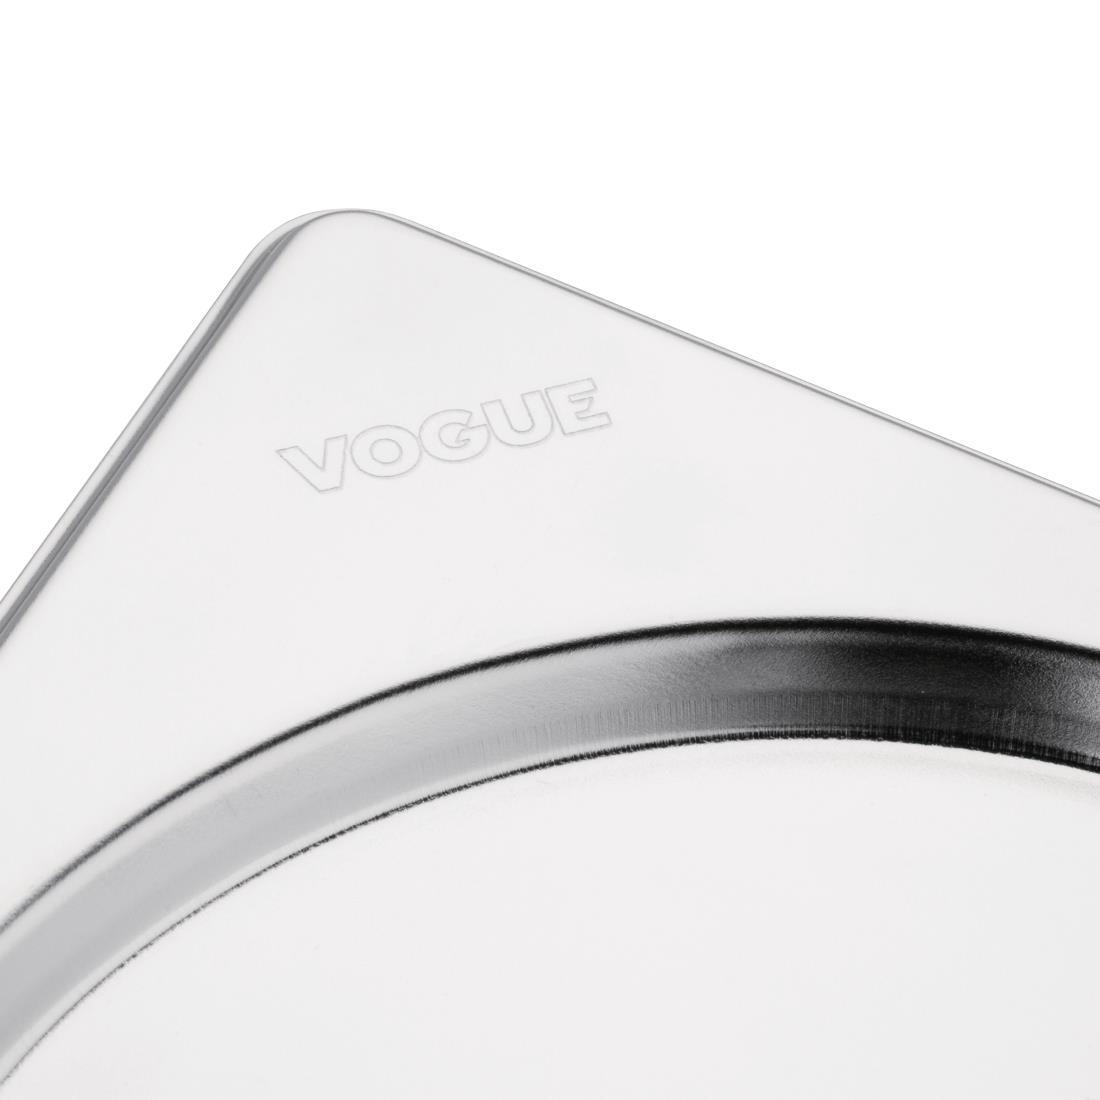 Vogue Stainless Steel 1/6 Gastronorm Lid - K993  - 4